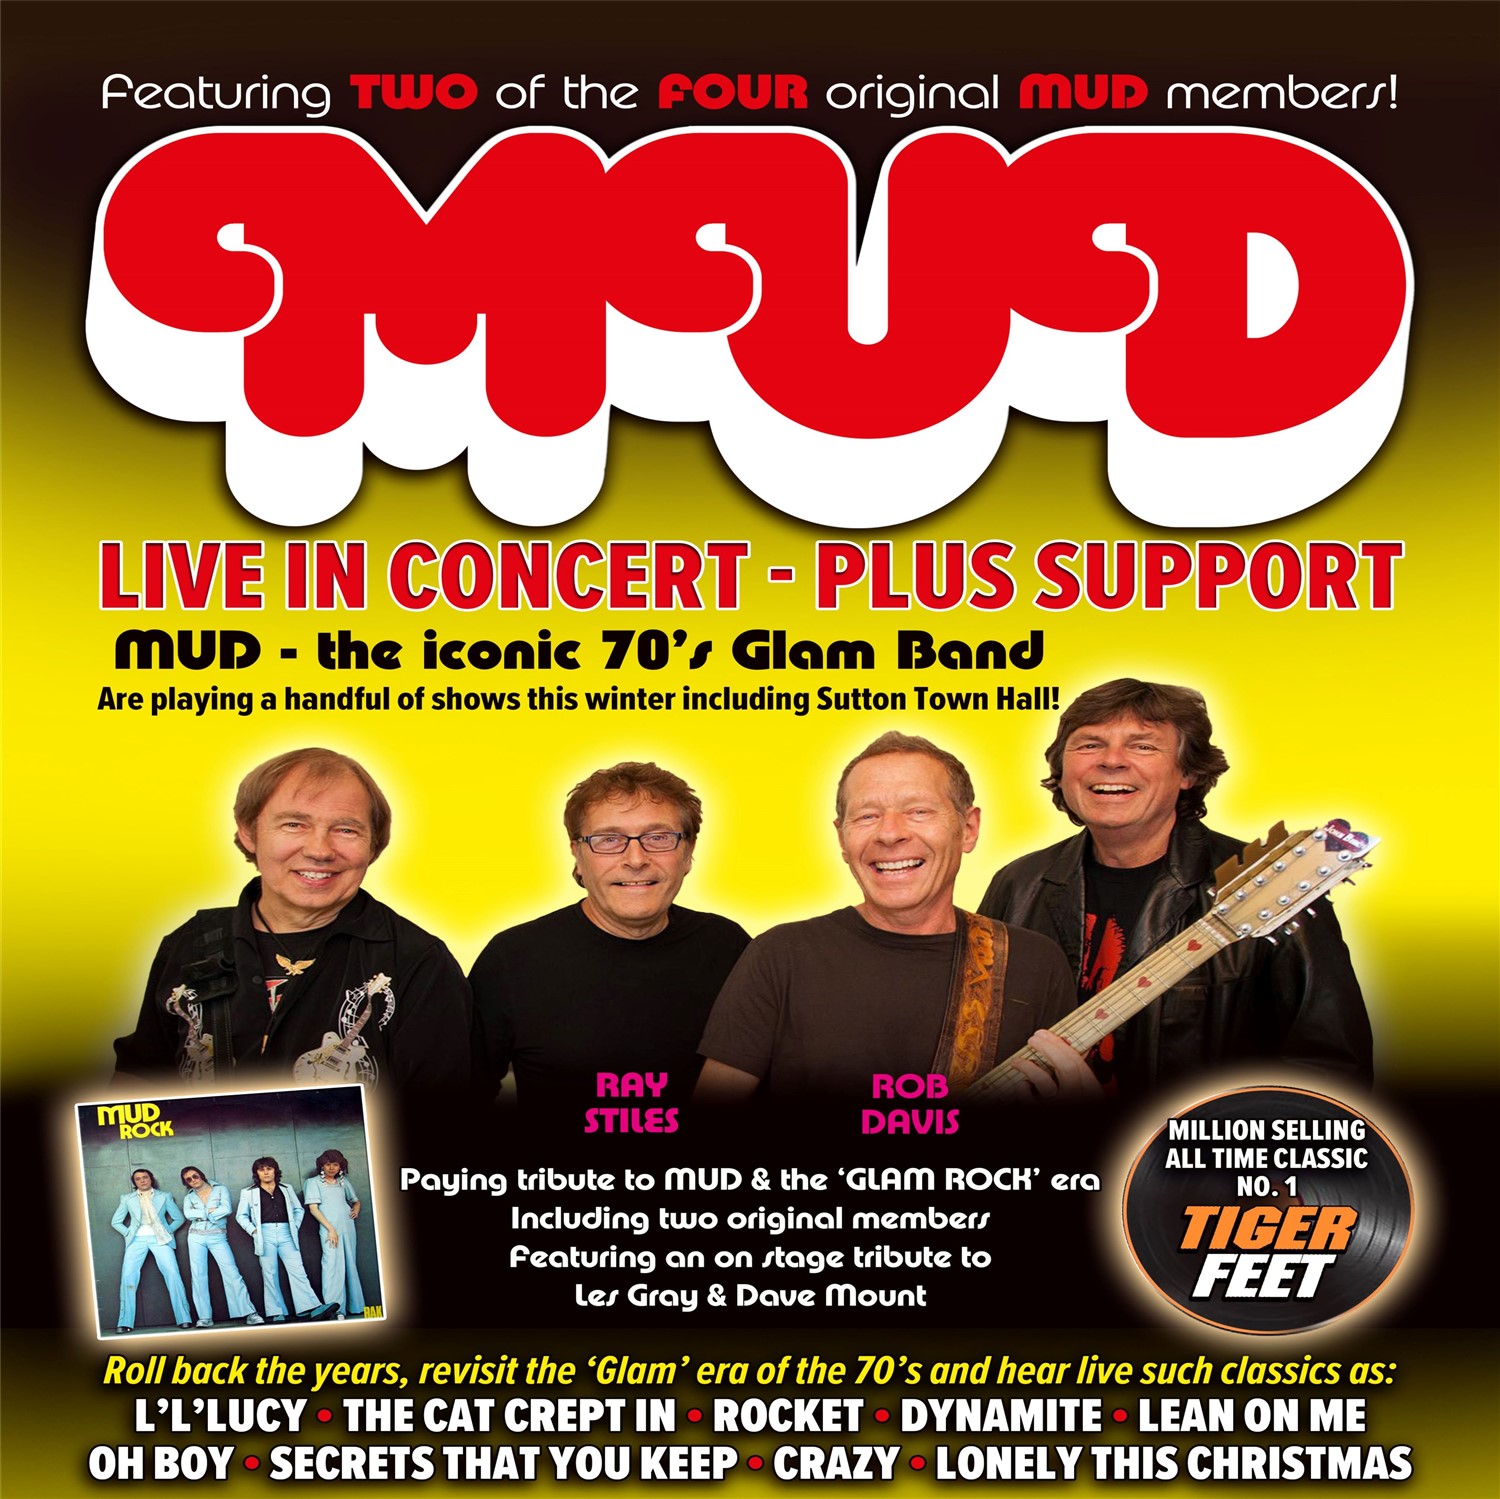 MUD - LIVE IN CONCERT Plus Support  on Nov 21, 07:30@Standard capacity - Pick a seat, Buy tickets and Get information on Sutton Coldfield Town Hall 